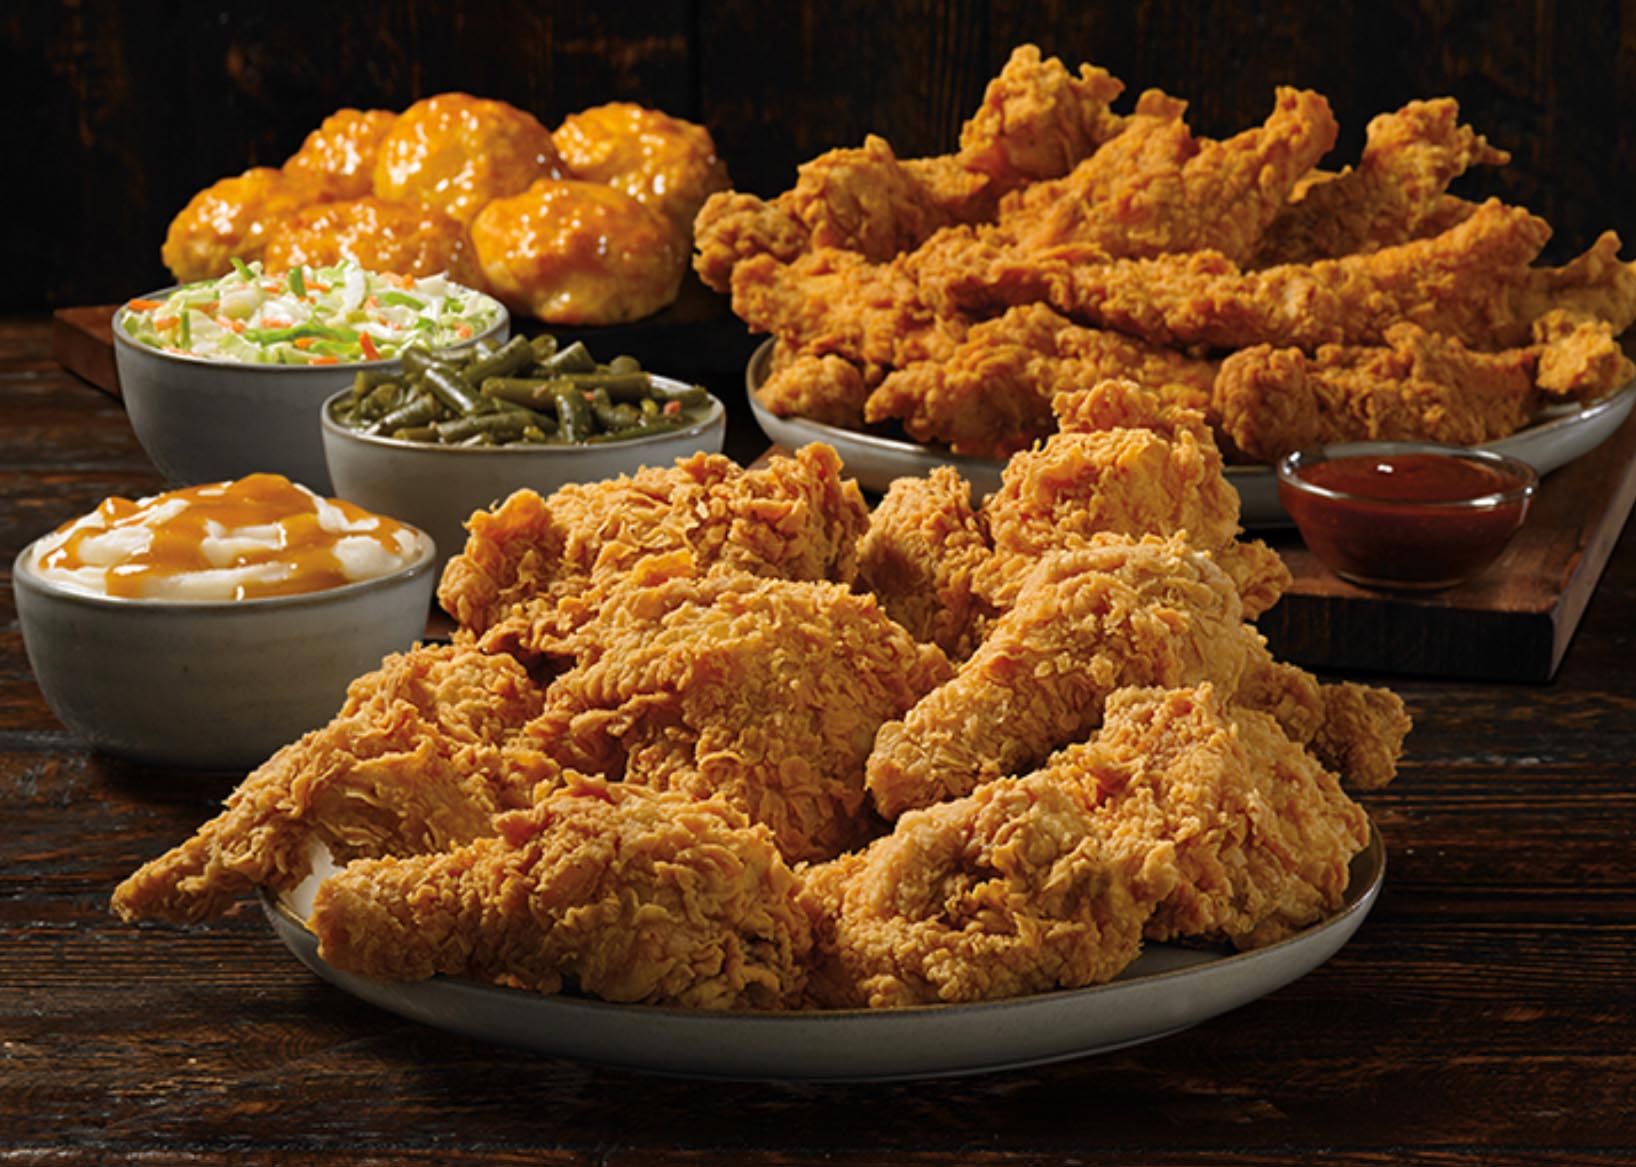 Save on Game Day with the Church’s Chicken Feed 6 Meal Starting at $20